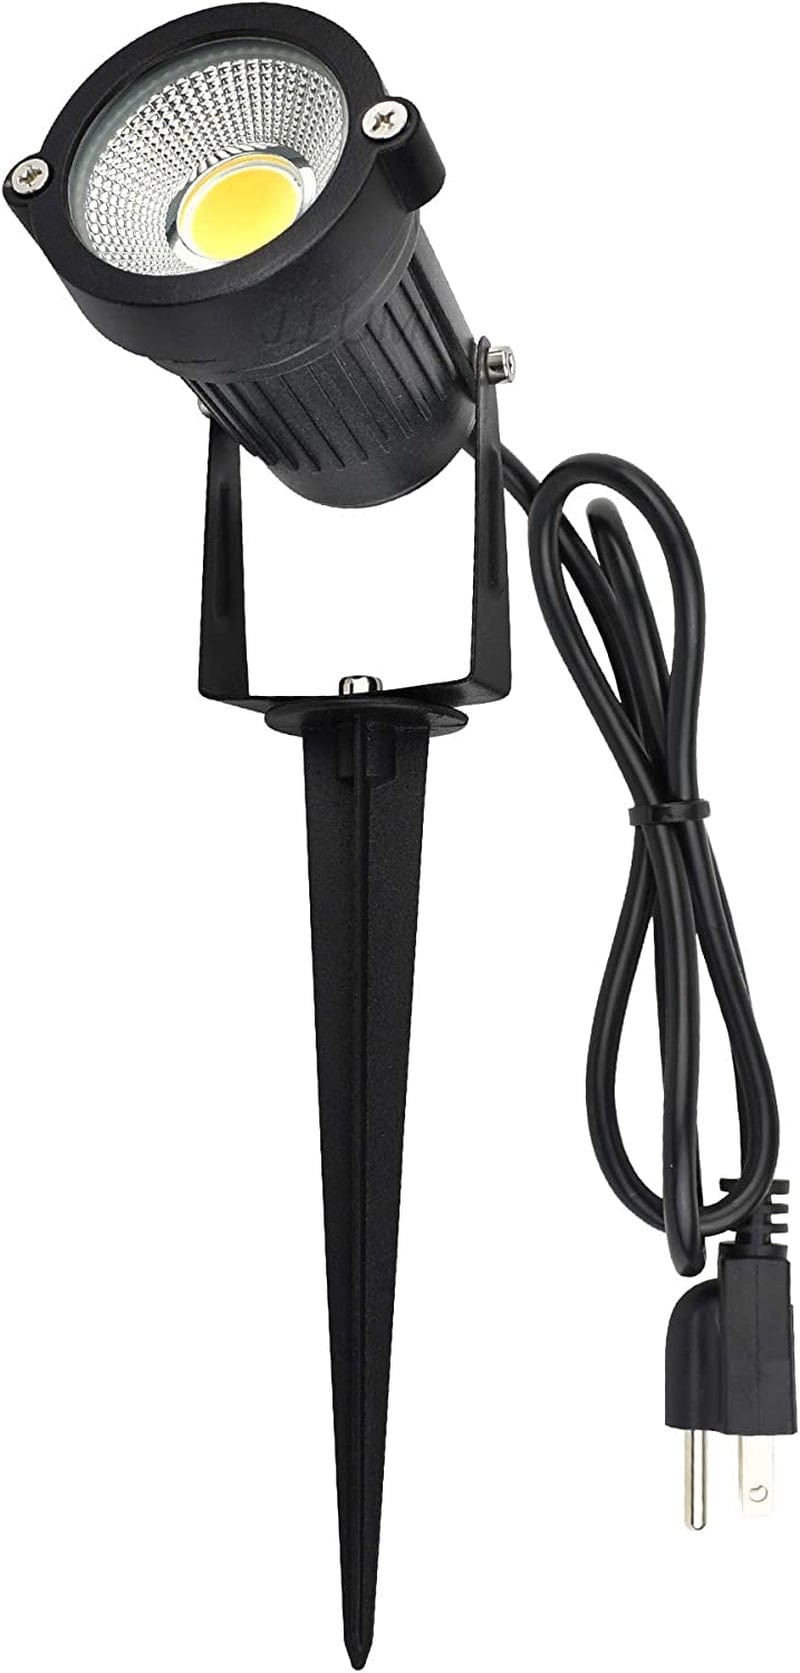 J.LUMI GSS6005 Outdoor LED Spotlights 5W, 120V AC, 3000K Warm, Metal Ground Stake, Outdoor Spotlight for House, 3-Ft Cord with Plug (Pack of 2) Home & Garden > Lighting > Flood & Spot Lights J.LUMI 1 1 pack 